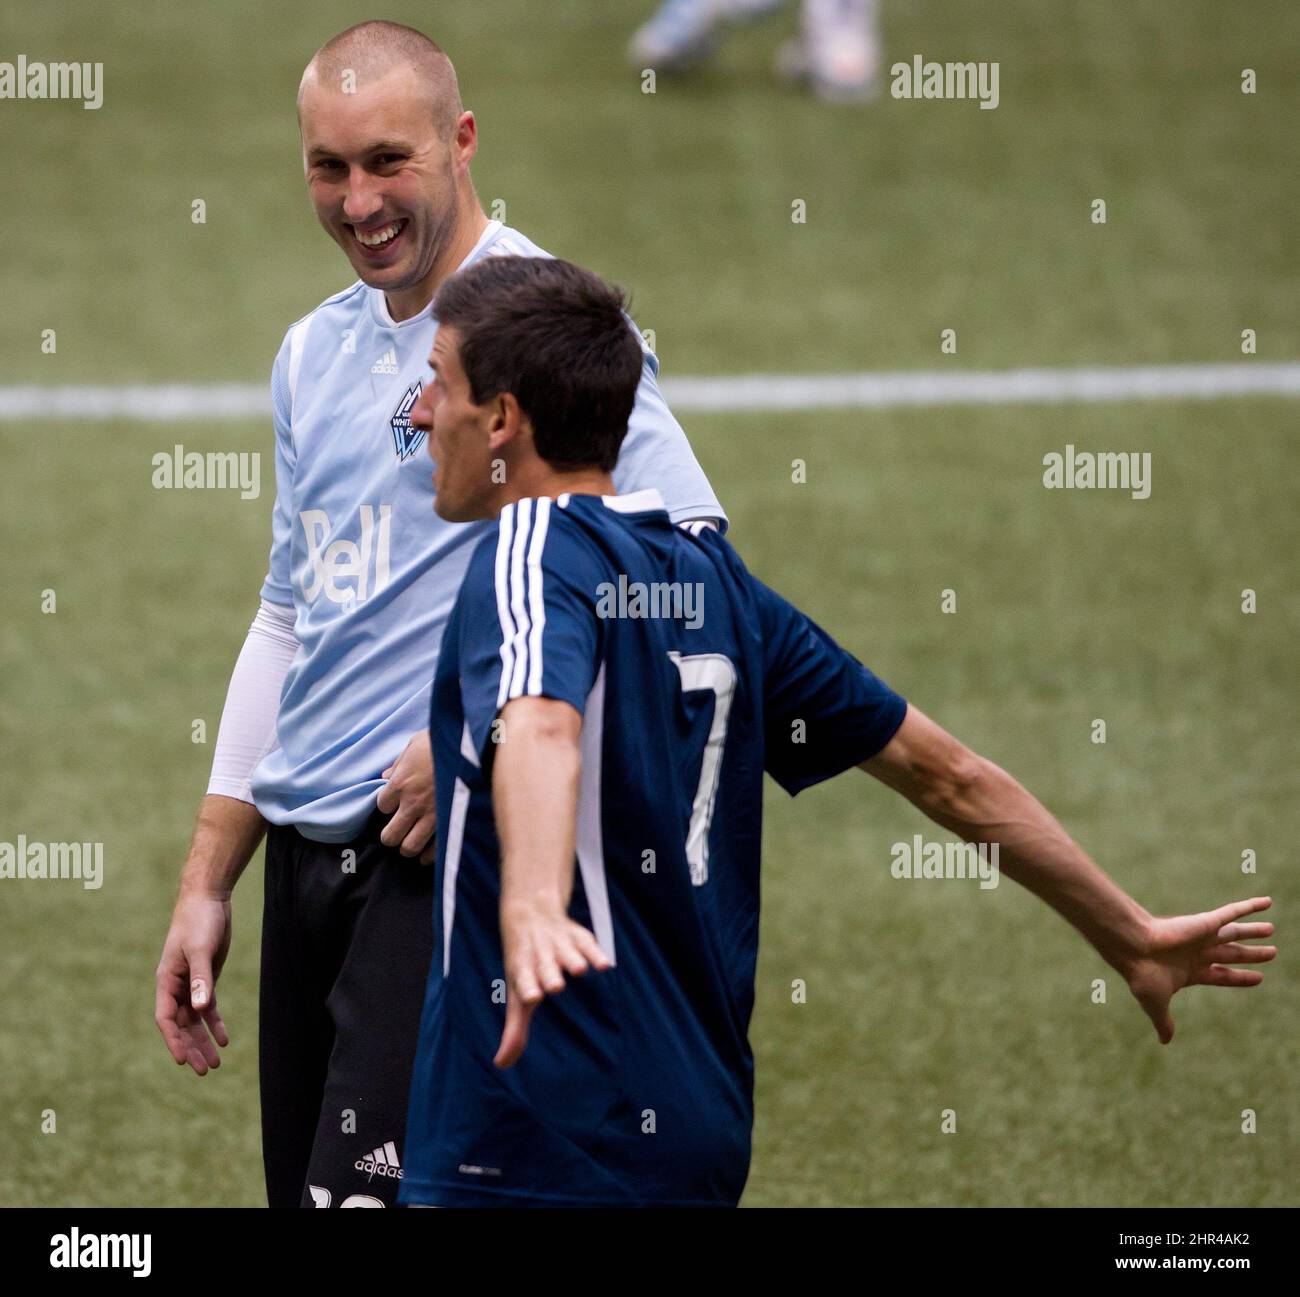 Vancouver Whitecaps' goalkeeper Brad Knighton, left, jokes with Sebastien Le Toux during a Major League Soccer training session in Vancouver, B.C., on Thursday March 8, 2012. The Whitecaps open the 2012 MLS season with a game against Montreal Saturday in Vancouver. THE CANADIAN PRESS/Darryl Dyck Stock Photo